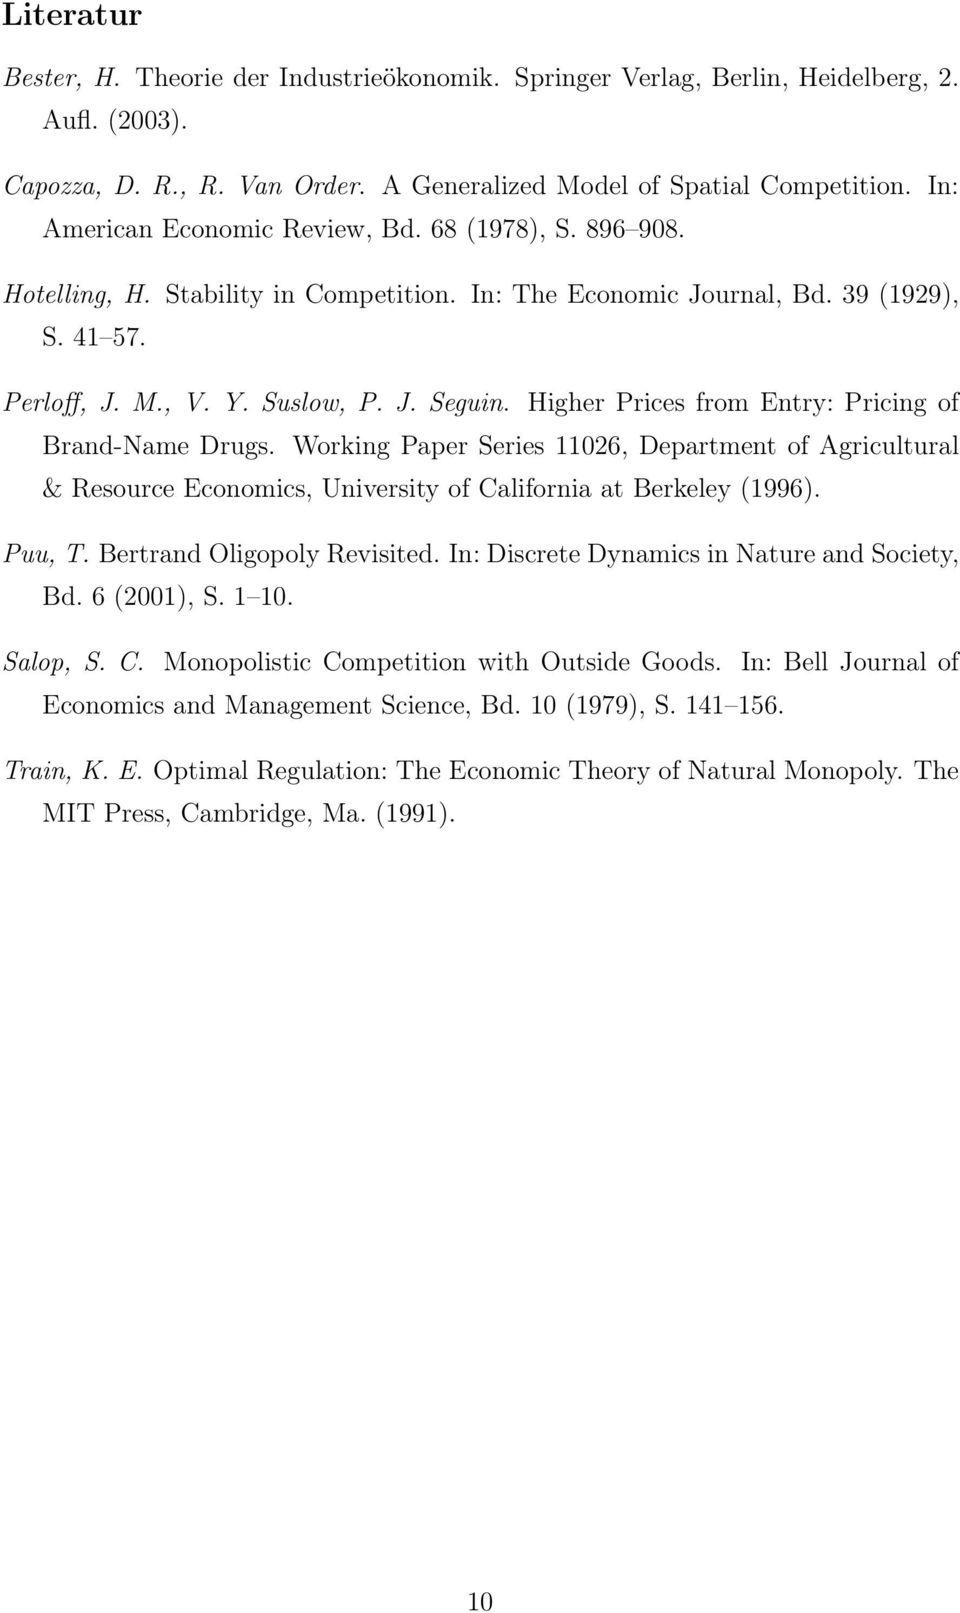 Higher Prices from Entry: Pricing of Brand-Name Drugs. Working Paper Series 1126, Department of Agricultural & Resource Economics, University of California at Berkeley (1996). Puu, T.